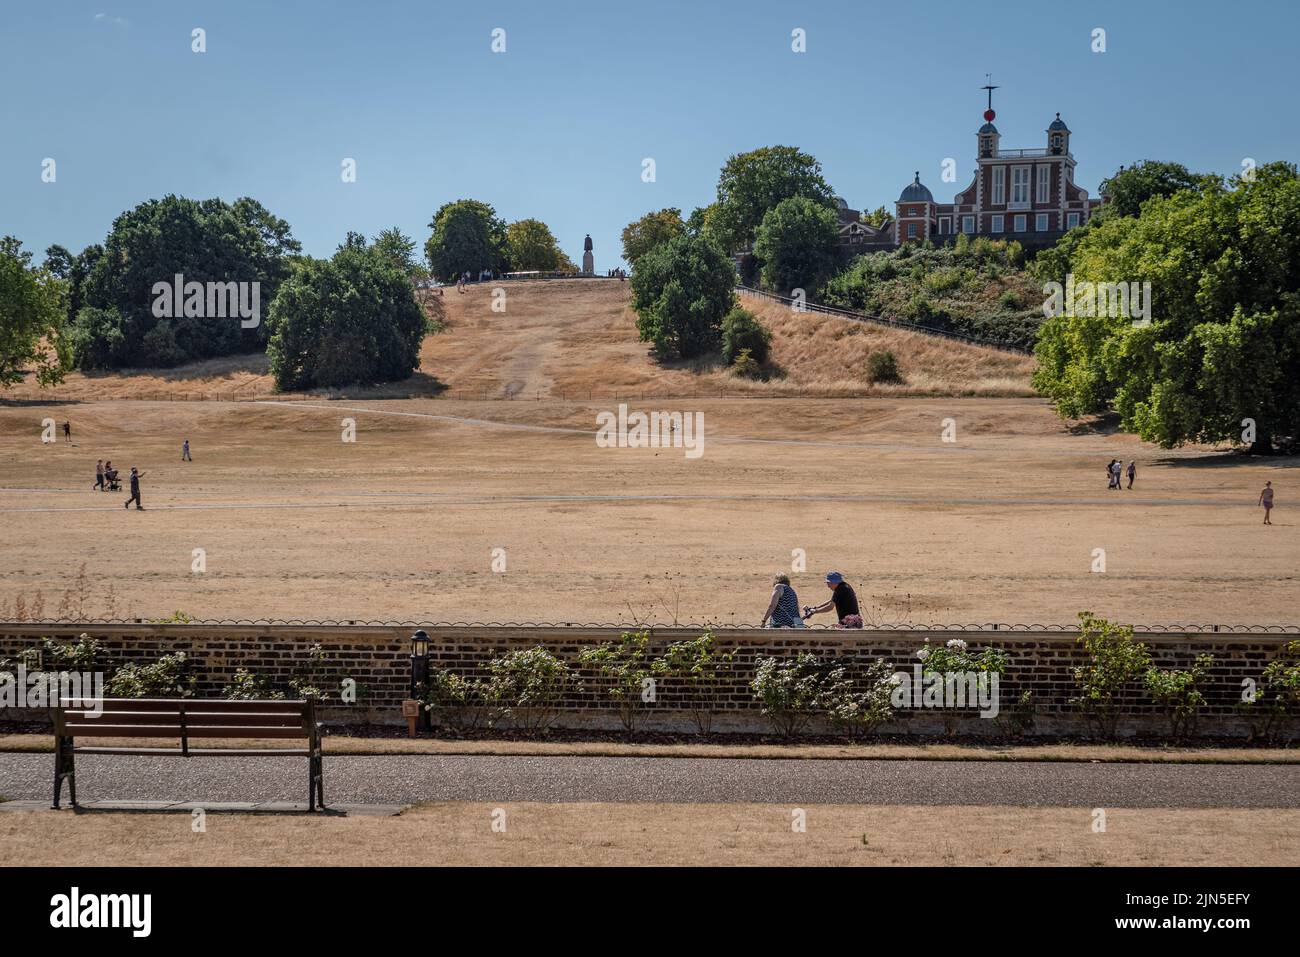 London, UK. 9th August, 2022. UK Weather: Greenwich Park remains dry parched as the summer drought continues with Britain braced for another heatwave predicted to last longer than July’s record-breaking hot spell, with highs of up to 35C expected over the week. Credit: Guy Corbishley/Alamy Live News Stock Photo